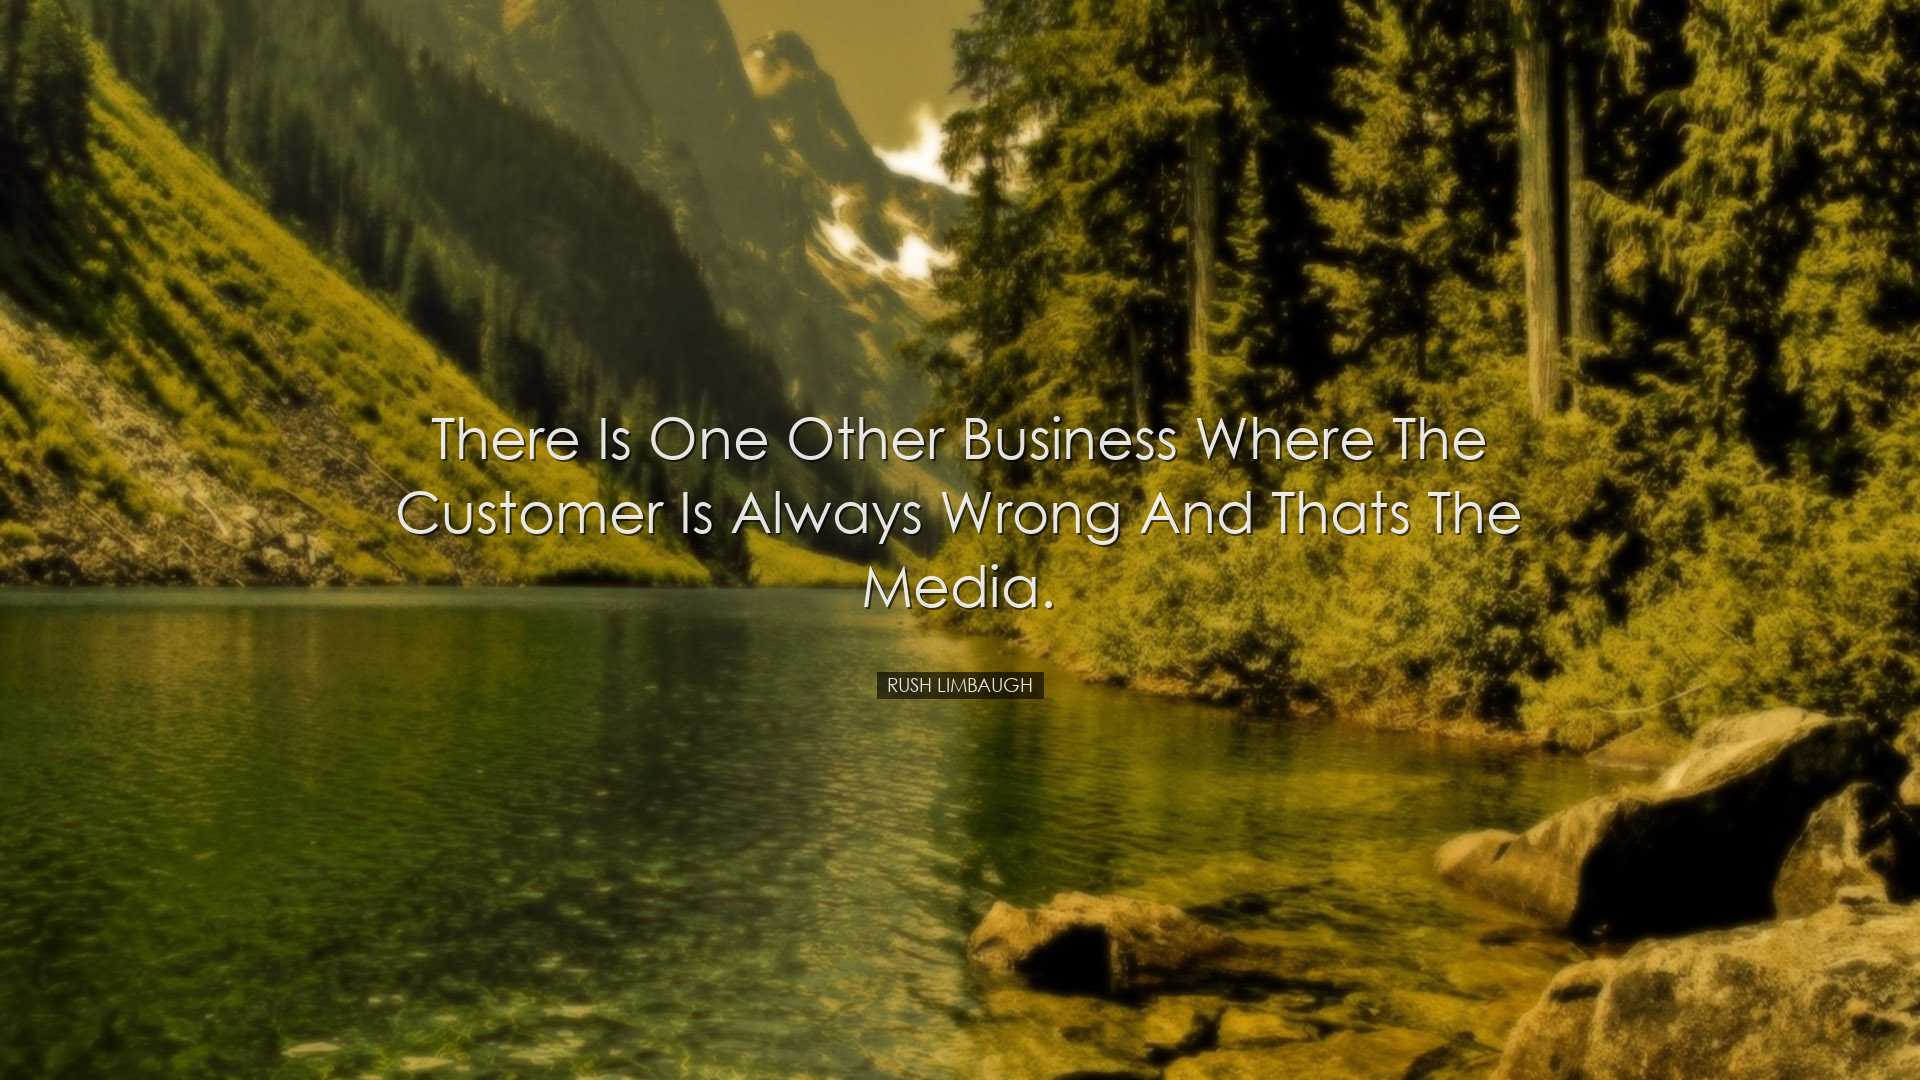 There is one other business where the customer is always wrong and